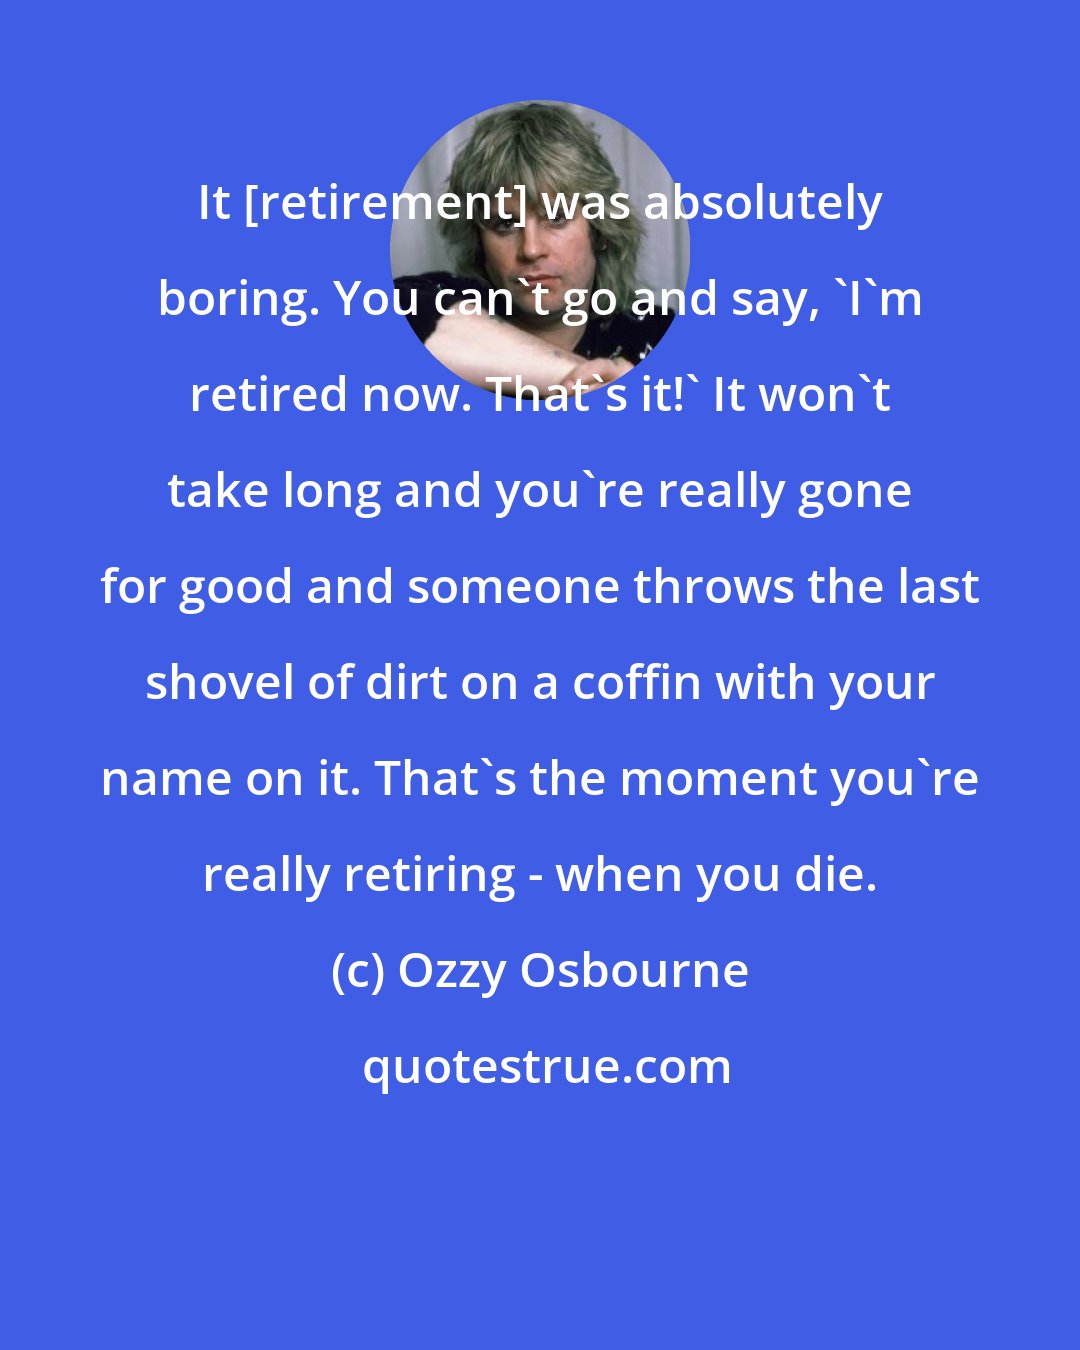 Ozzy Osbourne: It [retirement] was absolutely boring. You can't go and say, 'I'm retired now. That's it!' It won't take long and you're really gone for good and someone throws the last shovel of dirt on a coffin with your name on it. That's the moment you're really retiring - when you die.